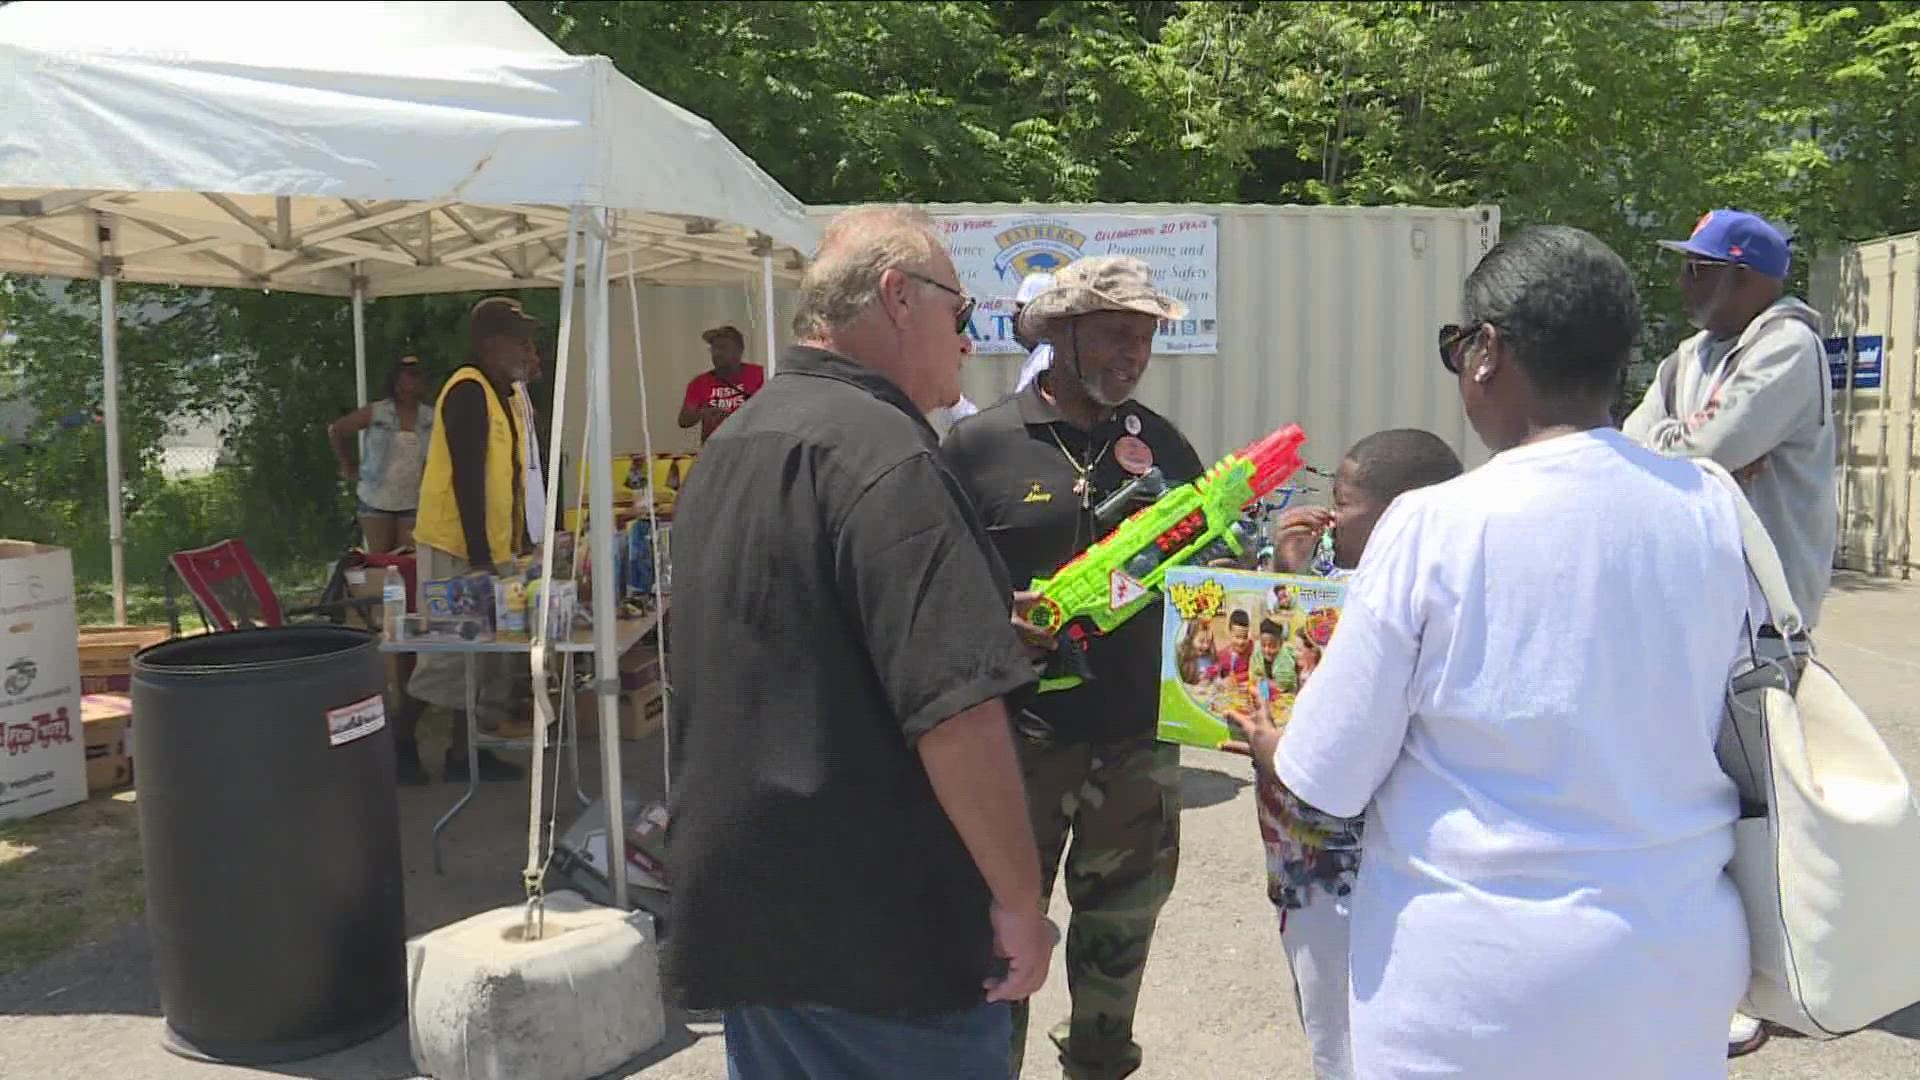 Toy Gun Exchange Aims To Curb Violence